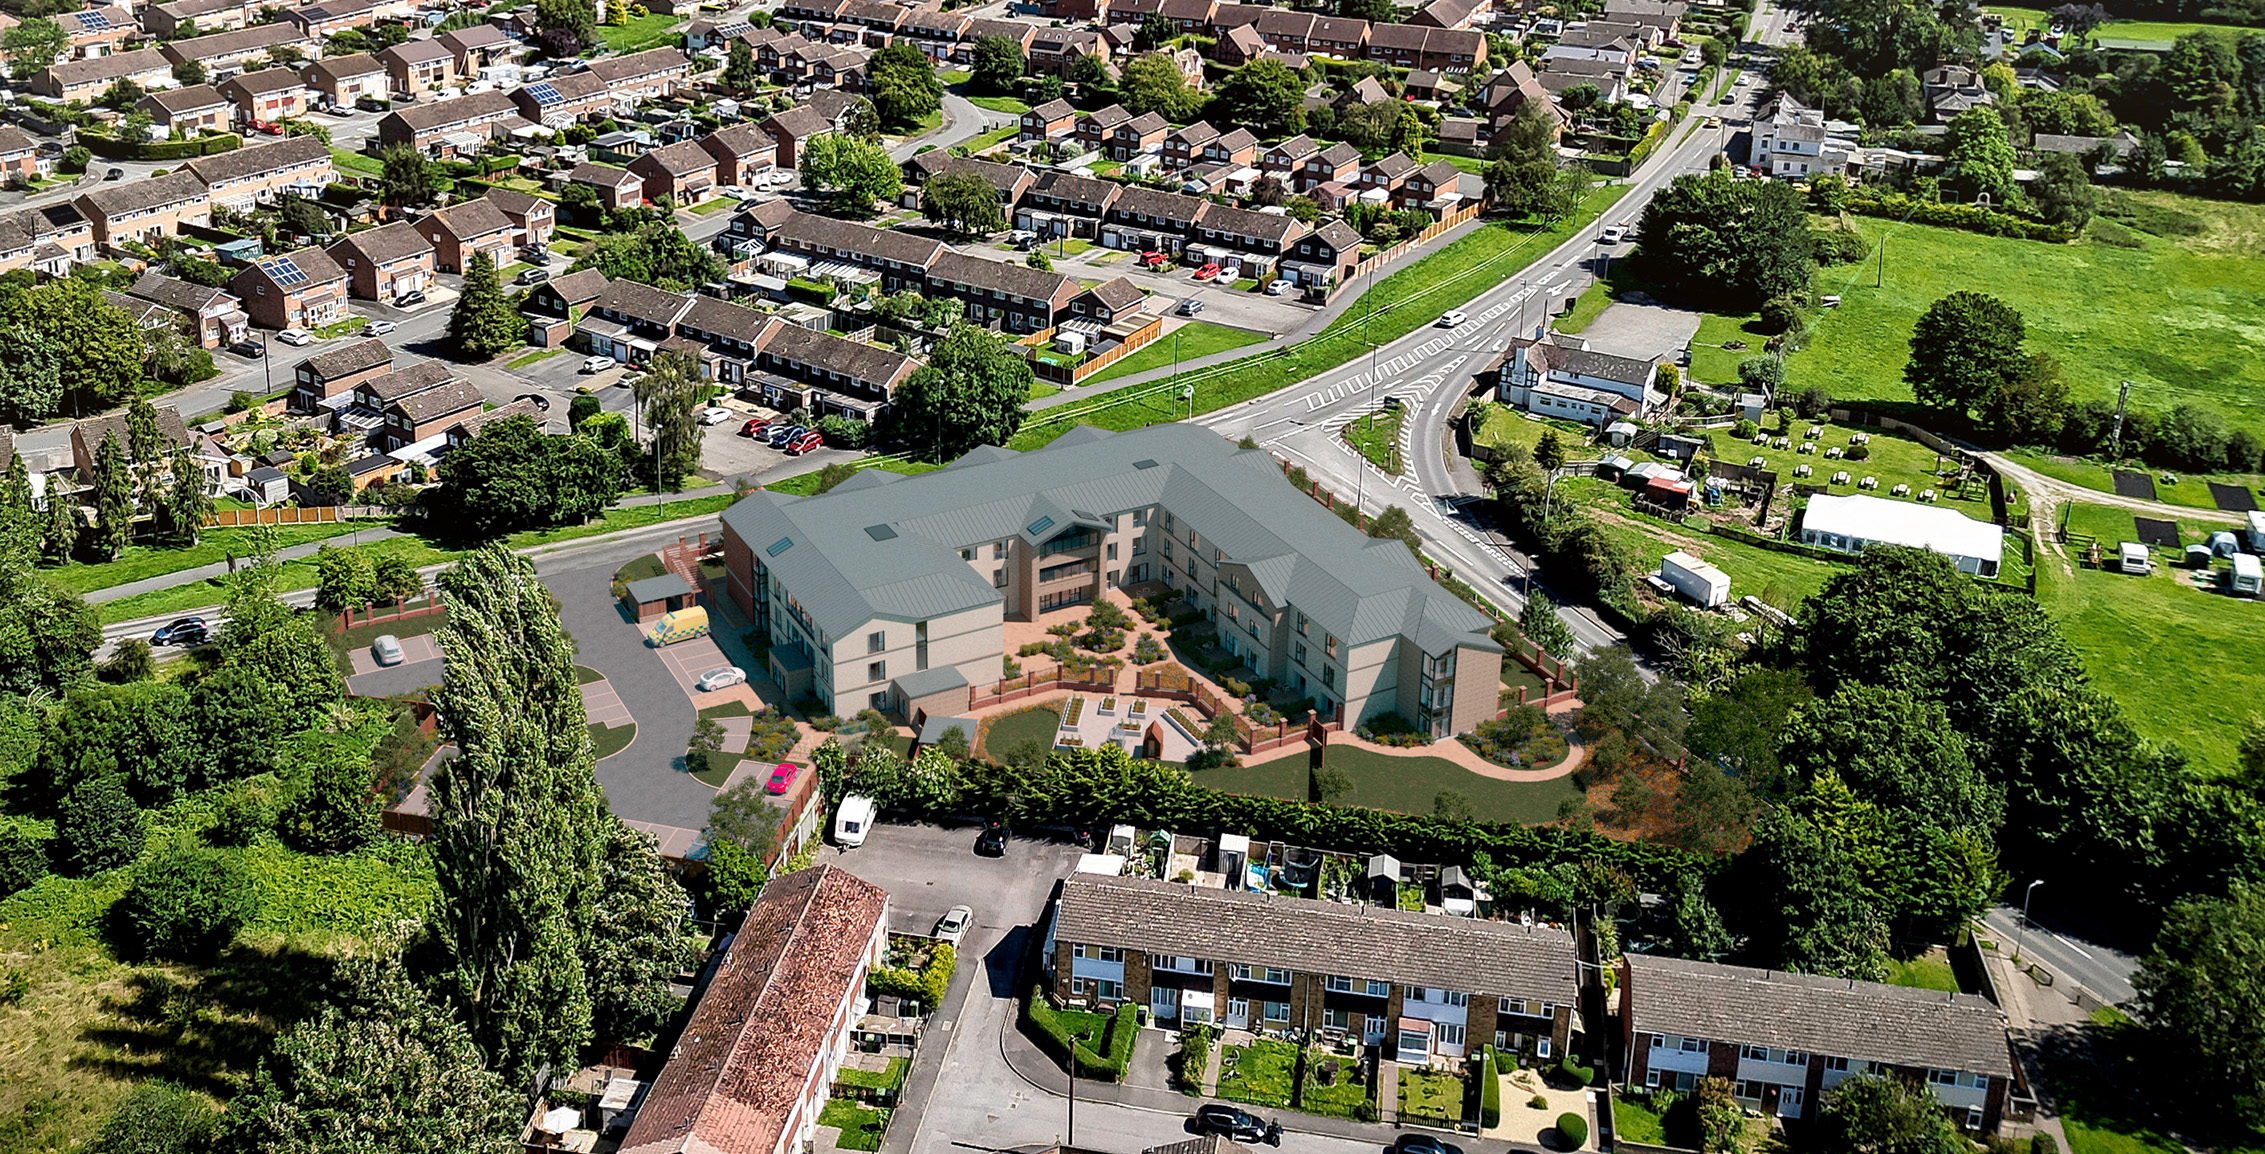 Care Home in Leominster - CGI Arial View